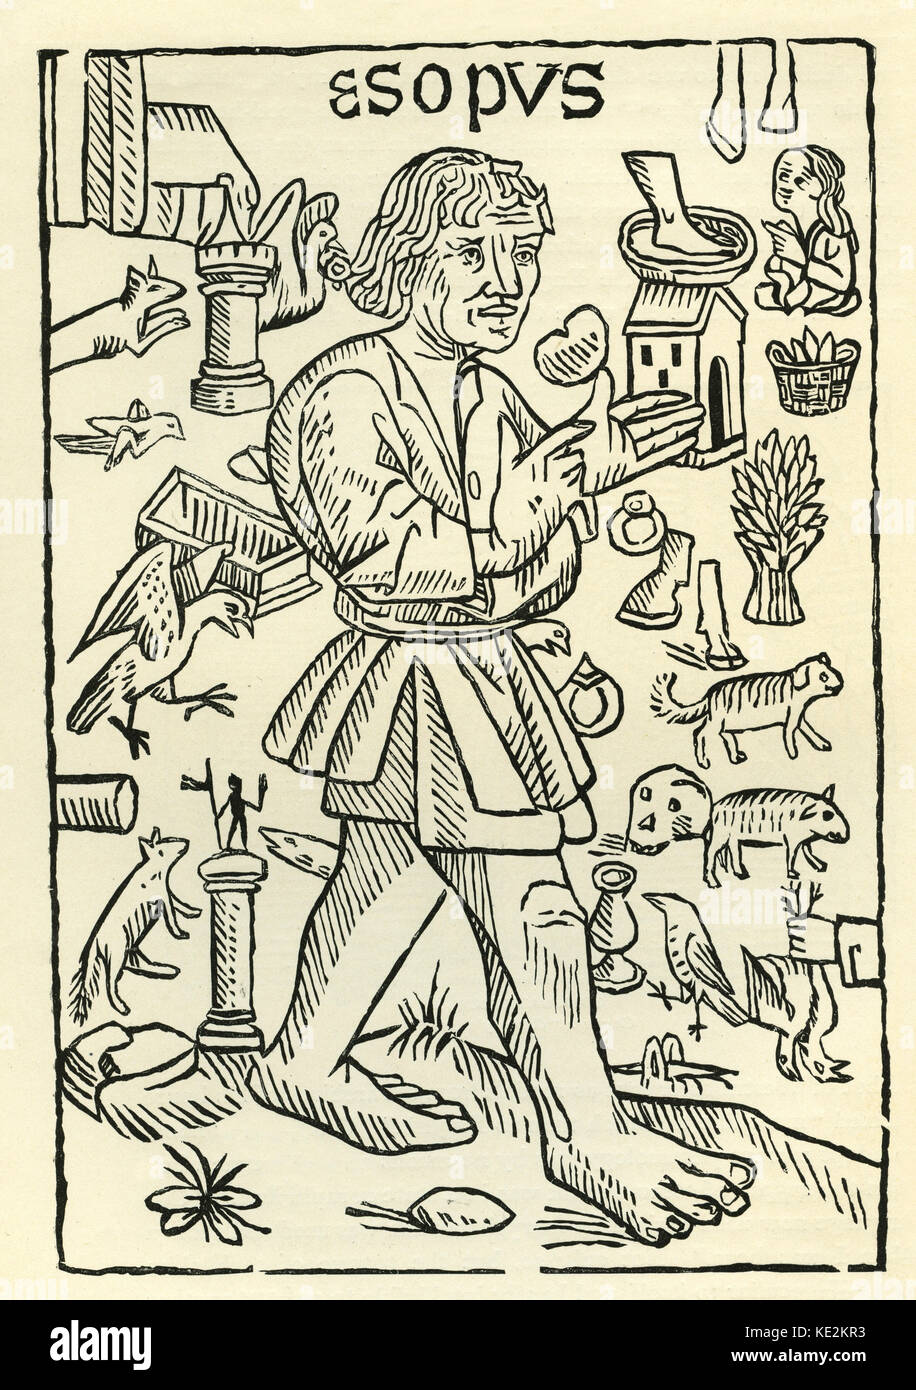 Aesop,  Æsop - frontpiece to ' Caxton's 'Fables of Æsop'. Known for his fables, was by tradition a Greek slave who lived from about 620 to 560 BC in Ancient Greece. Stock Photo